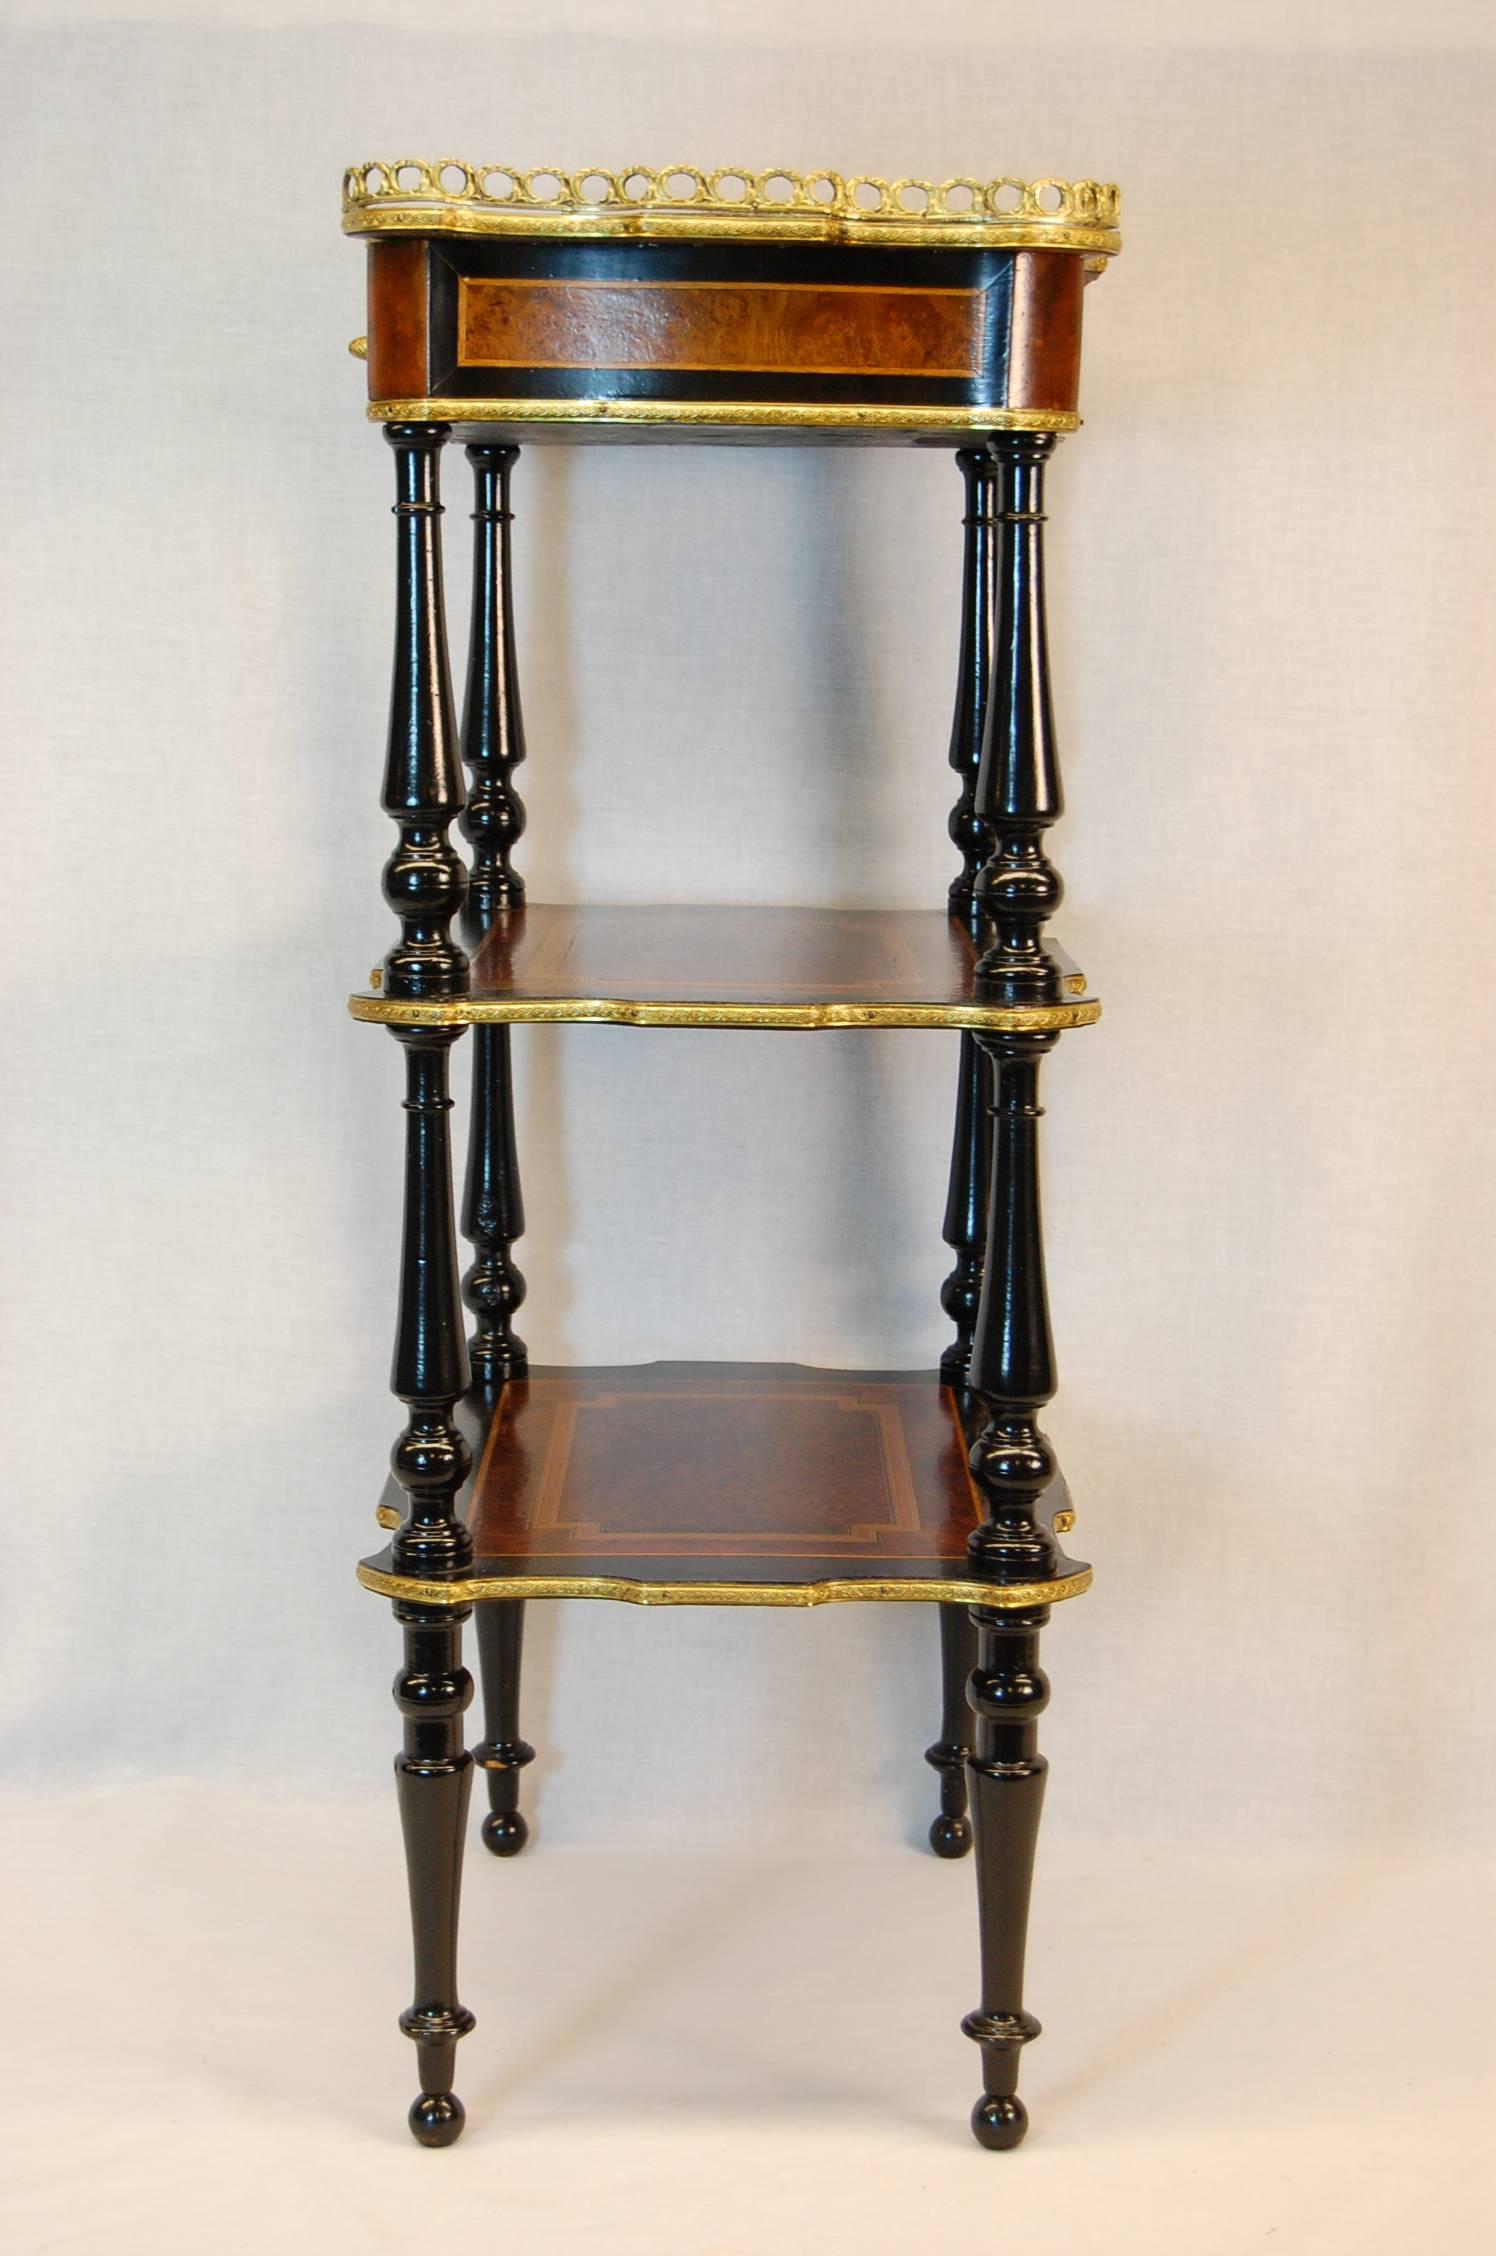 Late 19th Century French Neoclassical Revival Three-Tier Side Table, circa 1870 For Sale